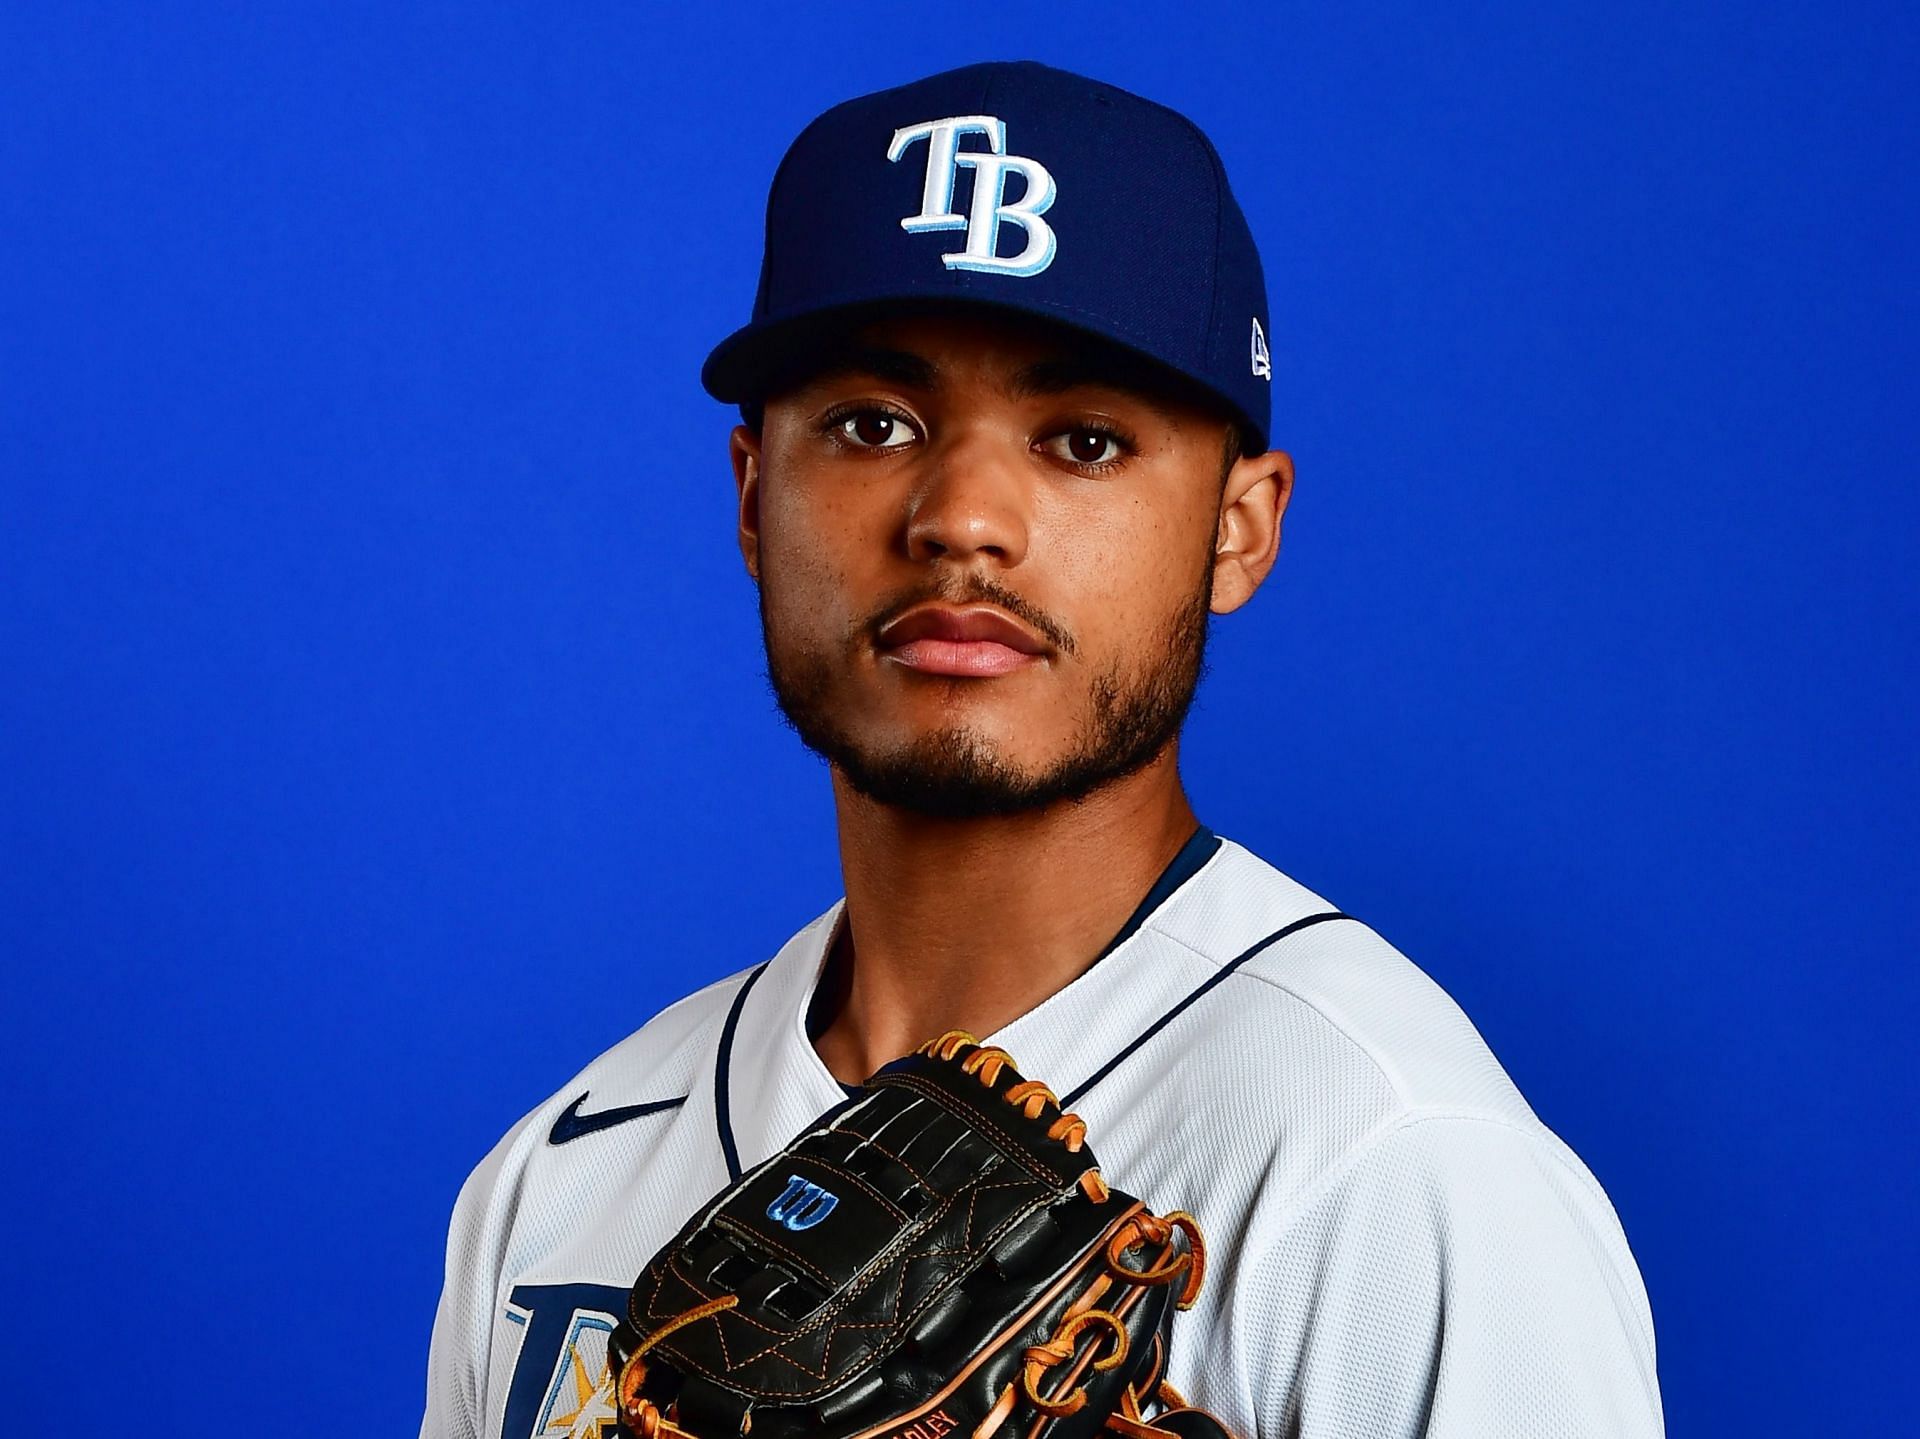 The Tampa Bay Rays have recalled top pitching prospect Taj Bradley from Triple-A